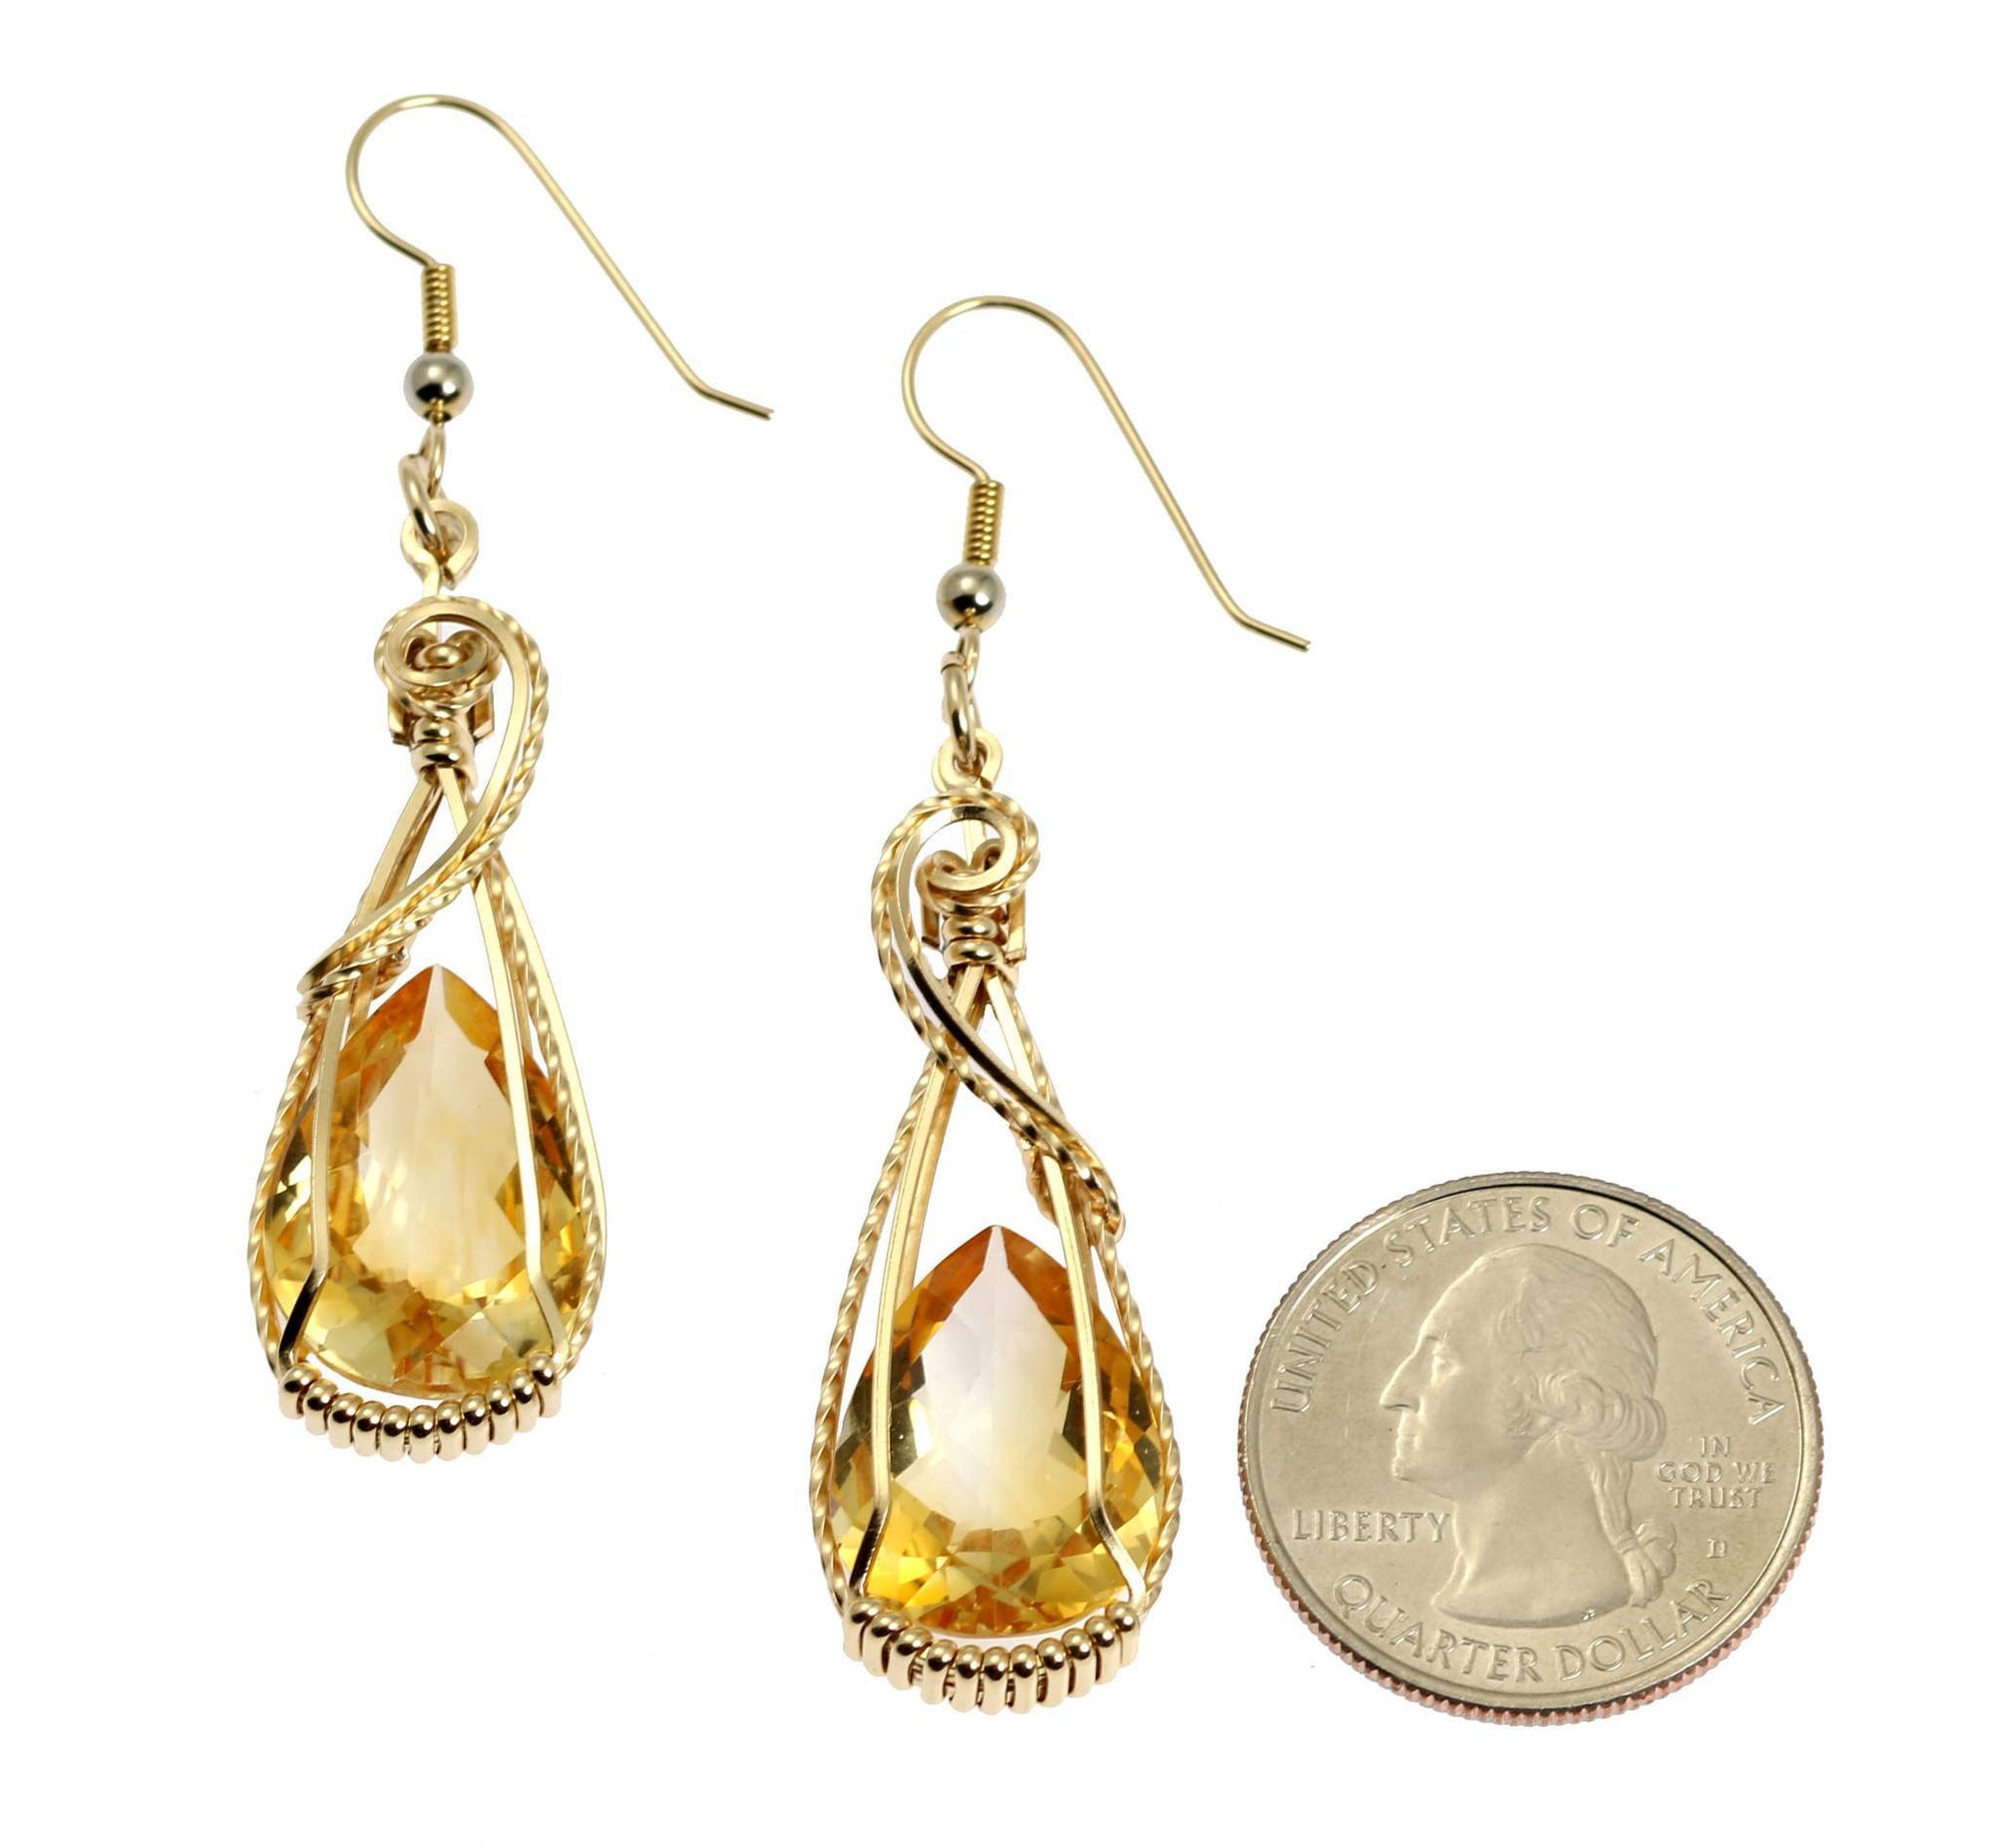 Size of 21 CT Citrine 14K Gold-filled Wire Wrapped Earrings